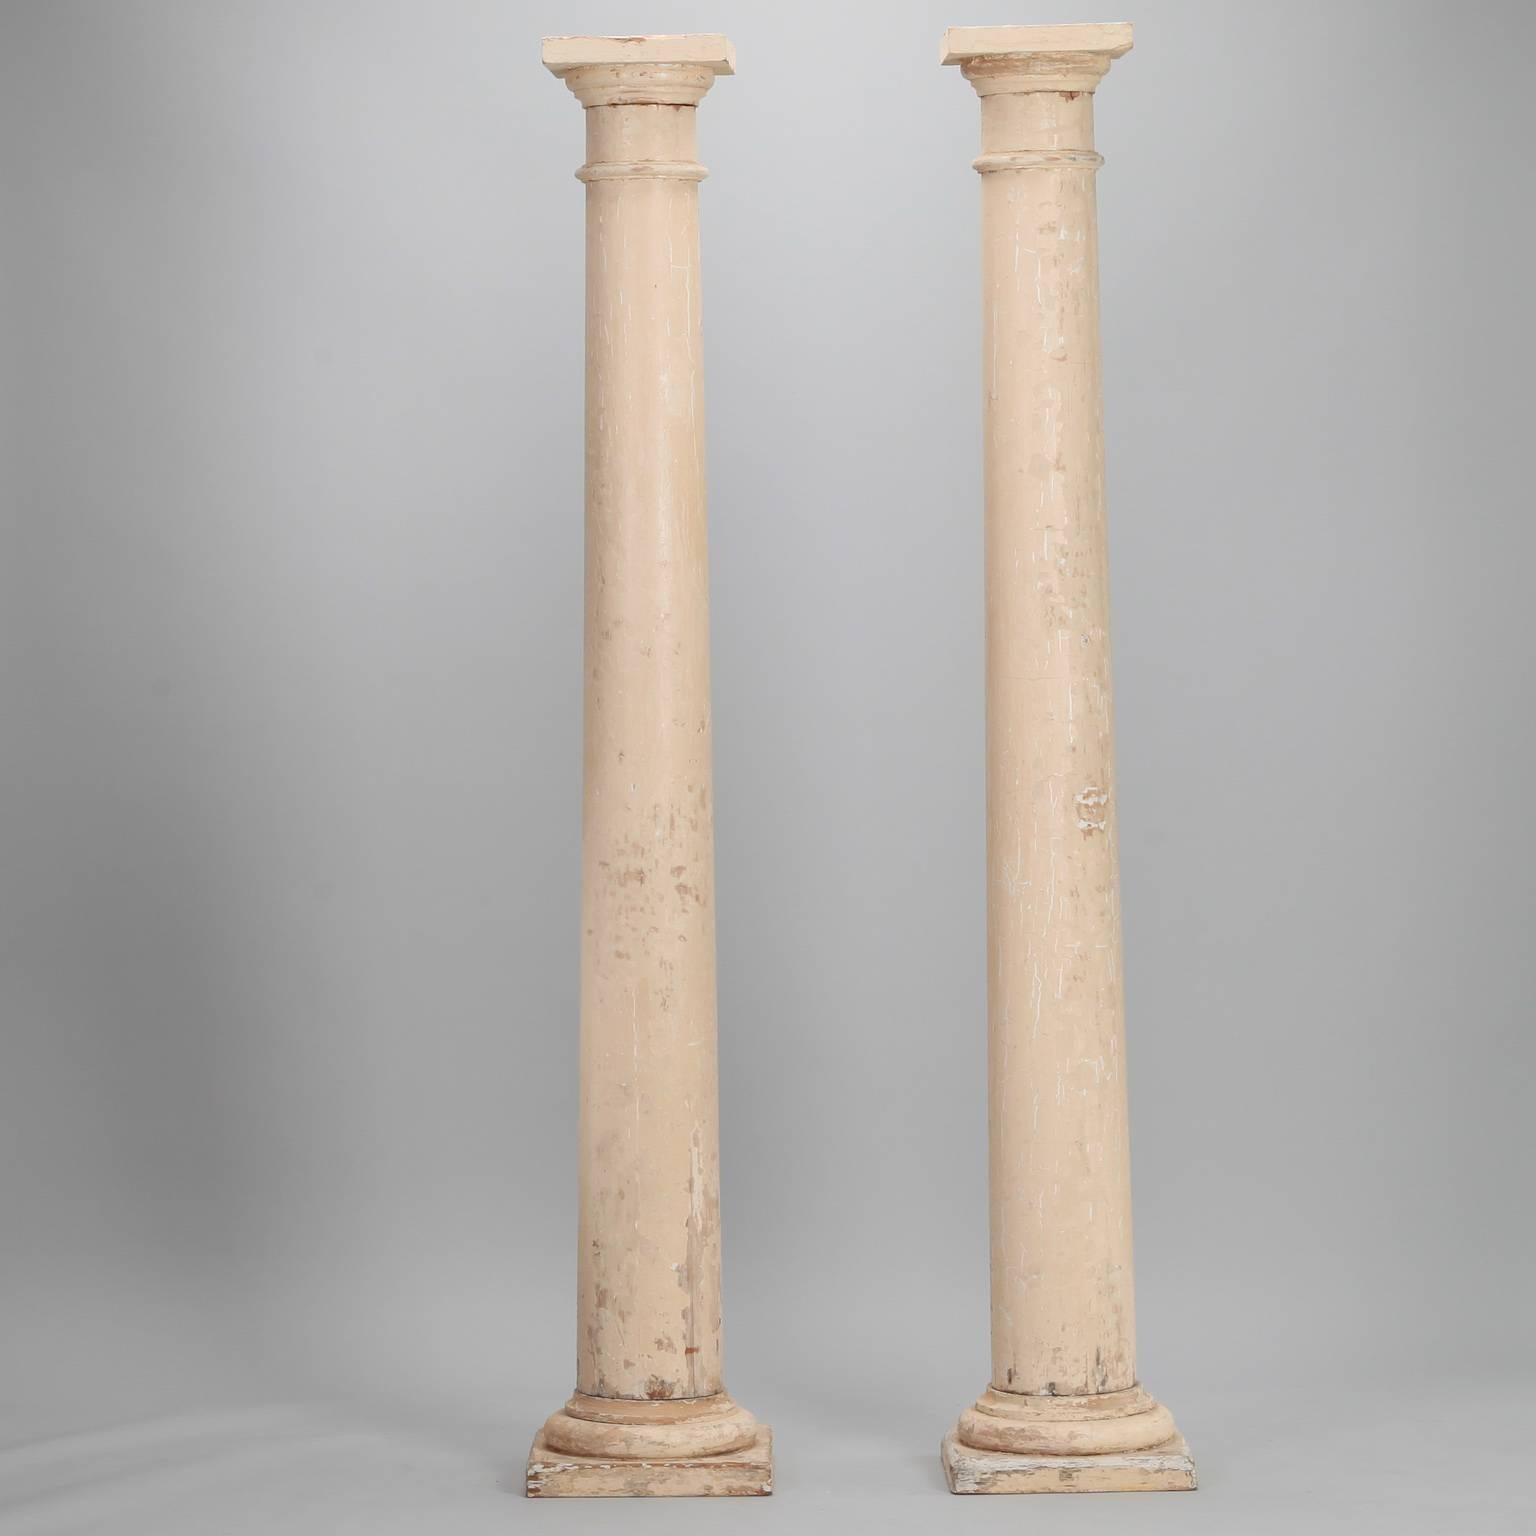 Pair of salvaged wood columns with antique white painted finish, circa 1900. Found in Belgium. Sold and priced as a pair. Excellent structural condition; painted finish has scattered areas of loss and wear.